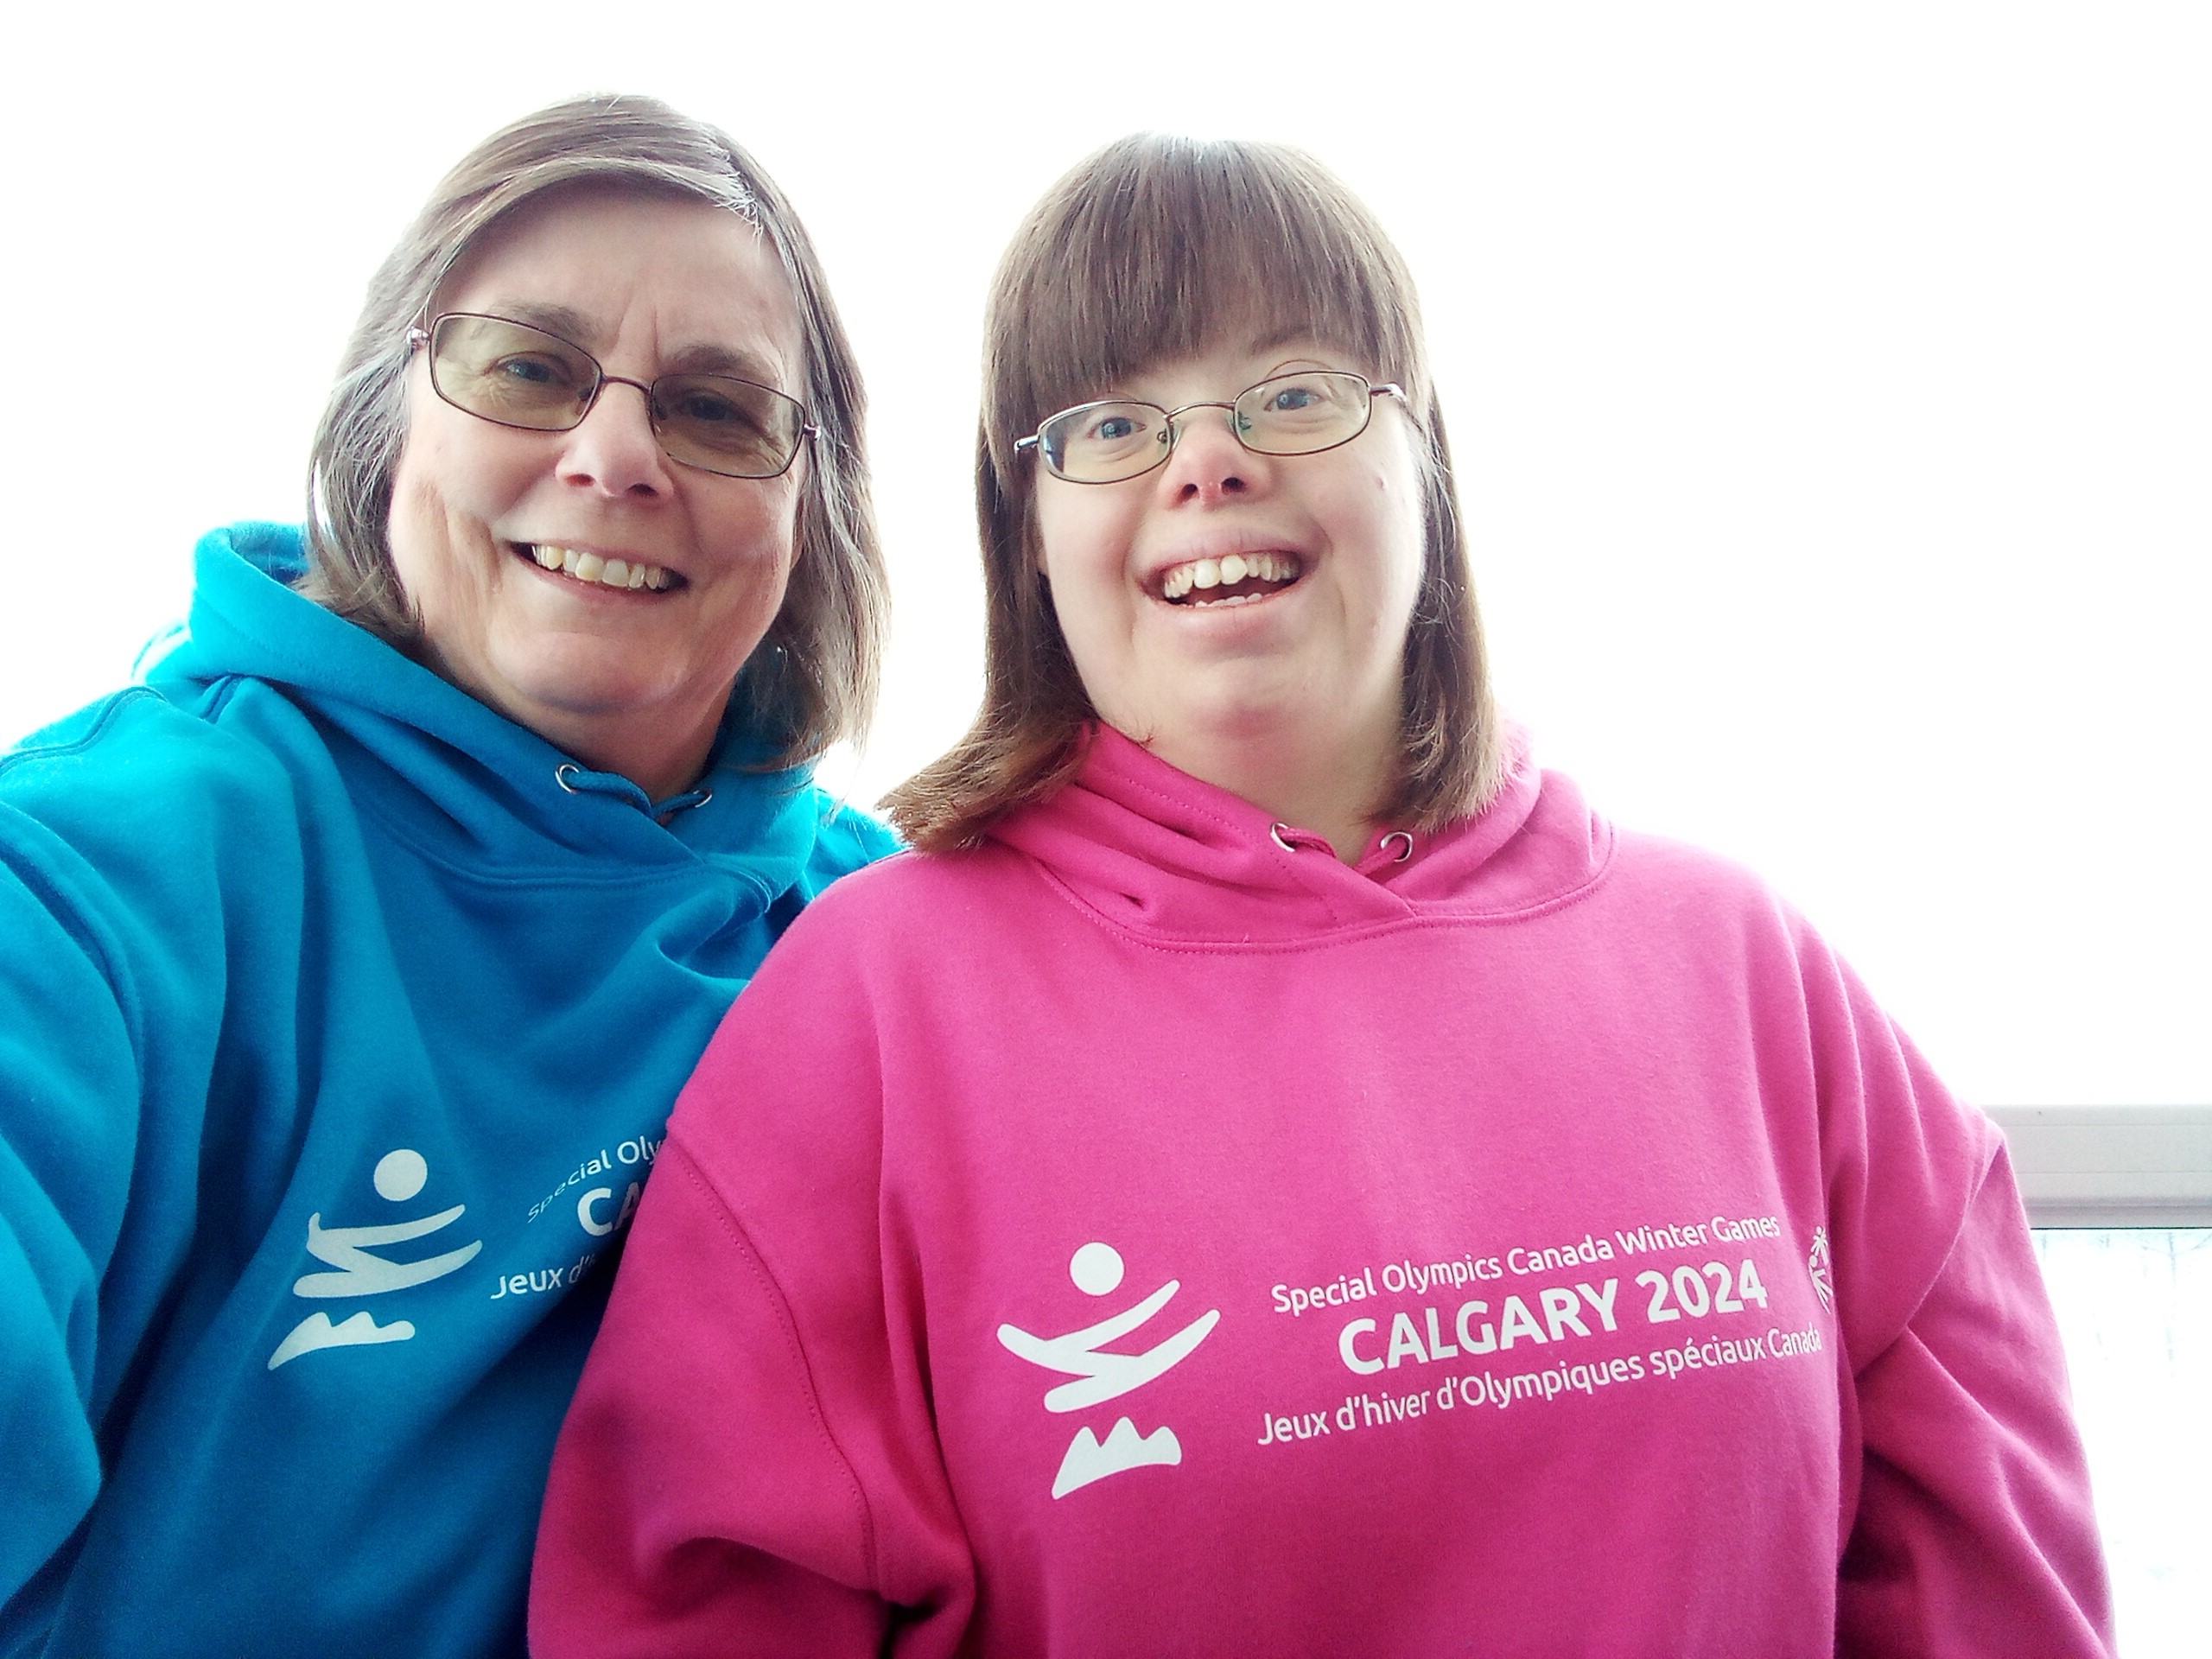 SOBC – Creston athlete Claire Lemaire and volunteer Corinne Lemaire